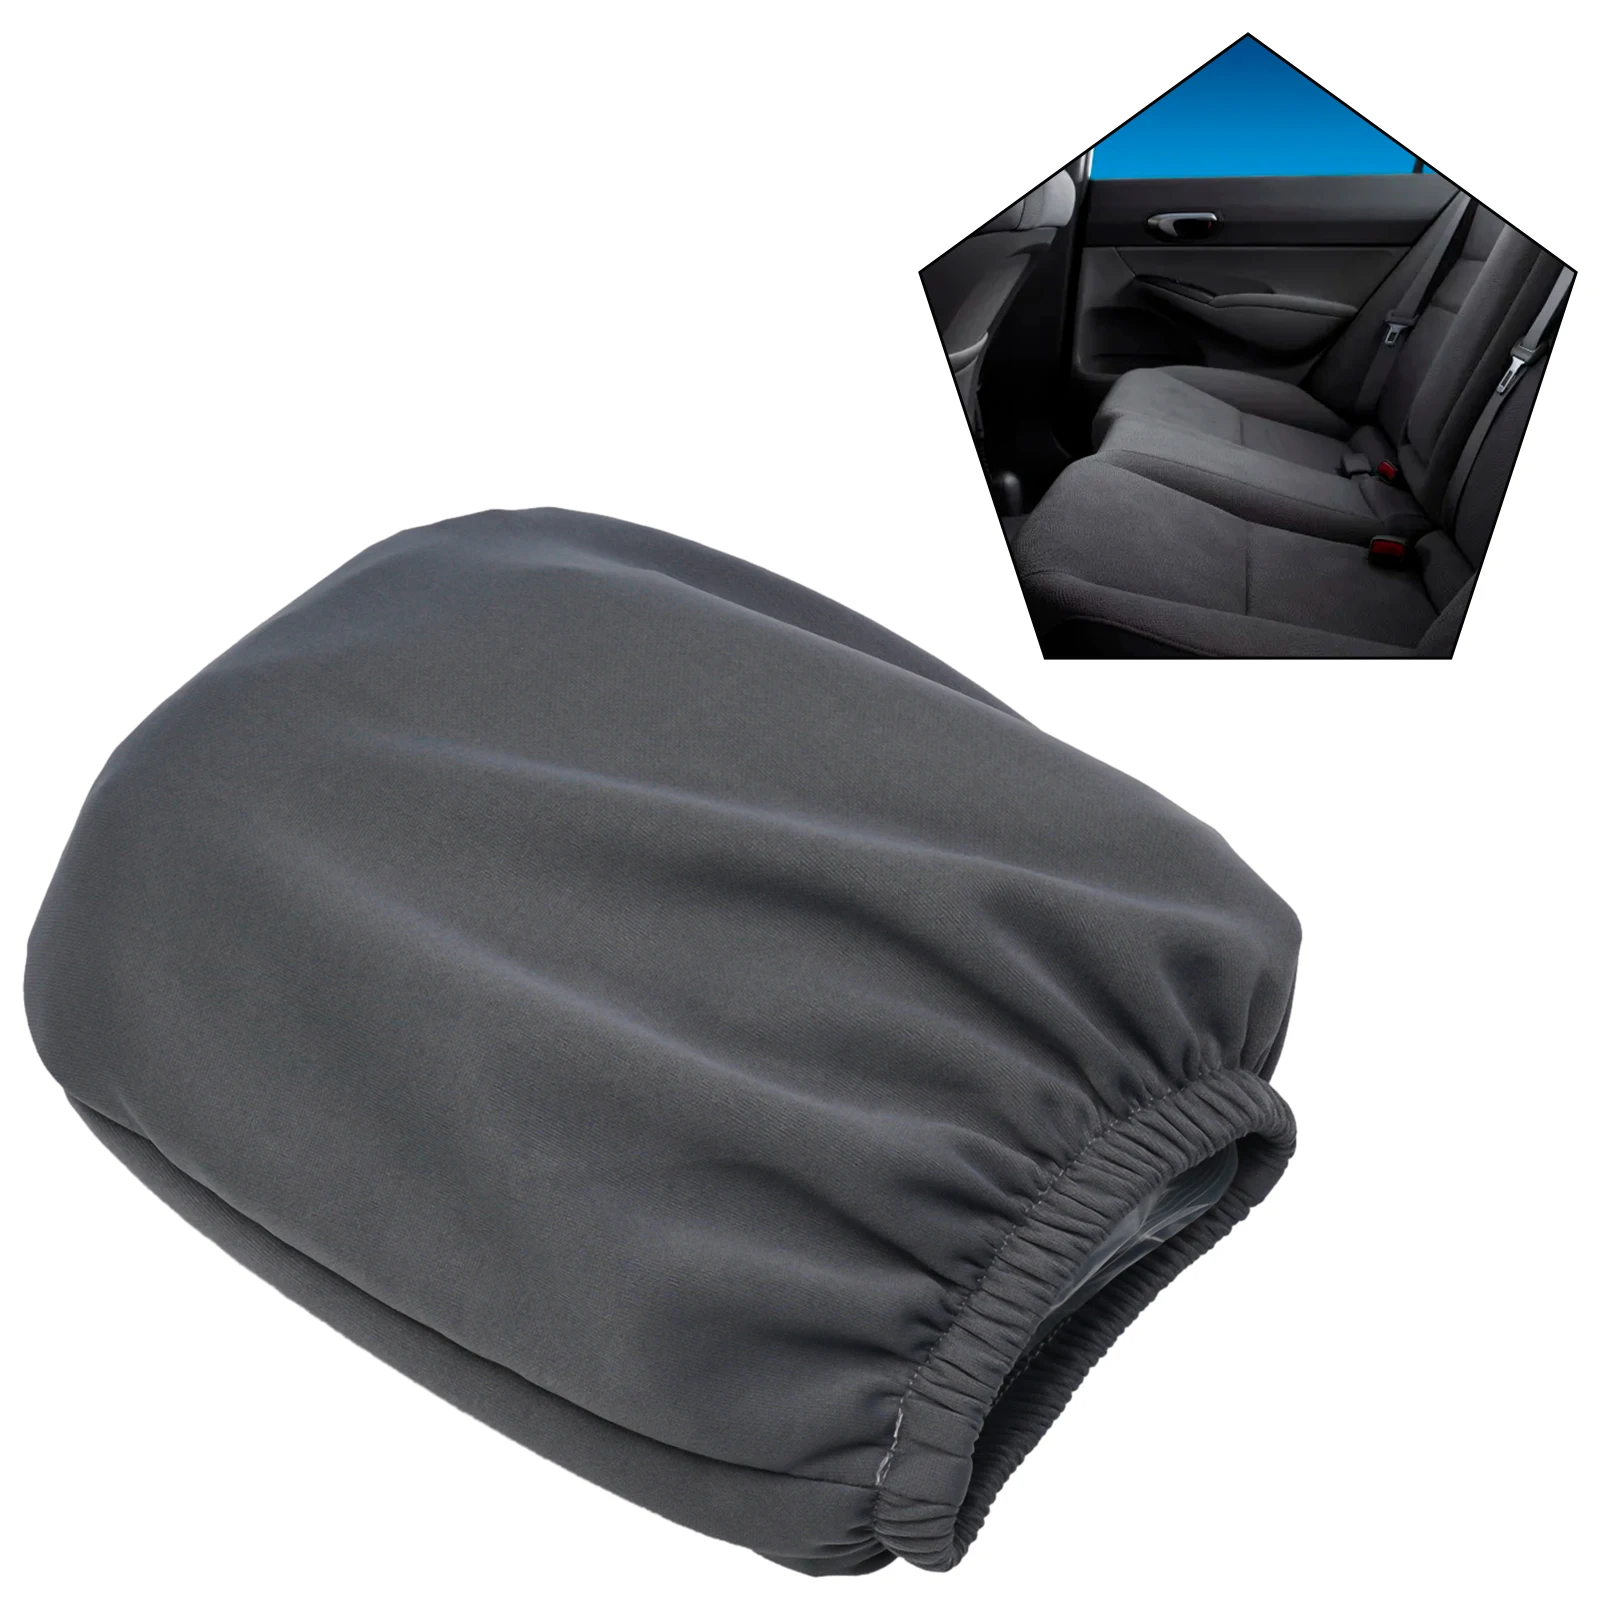 

Black Premium Cloth Headrest Cover for Car Truck SUV and Auto Universal Fit Add Comfort and Style to Your Ride